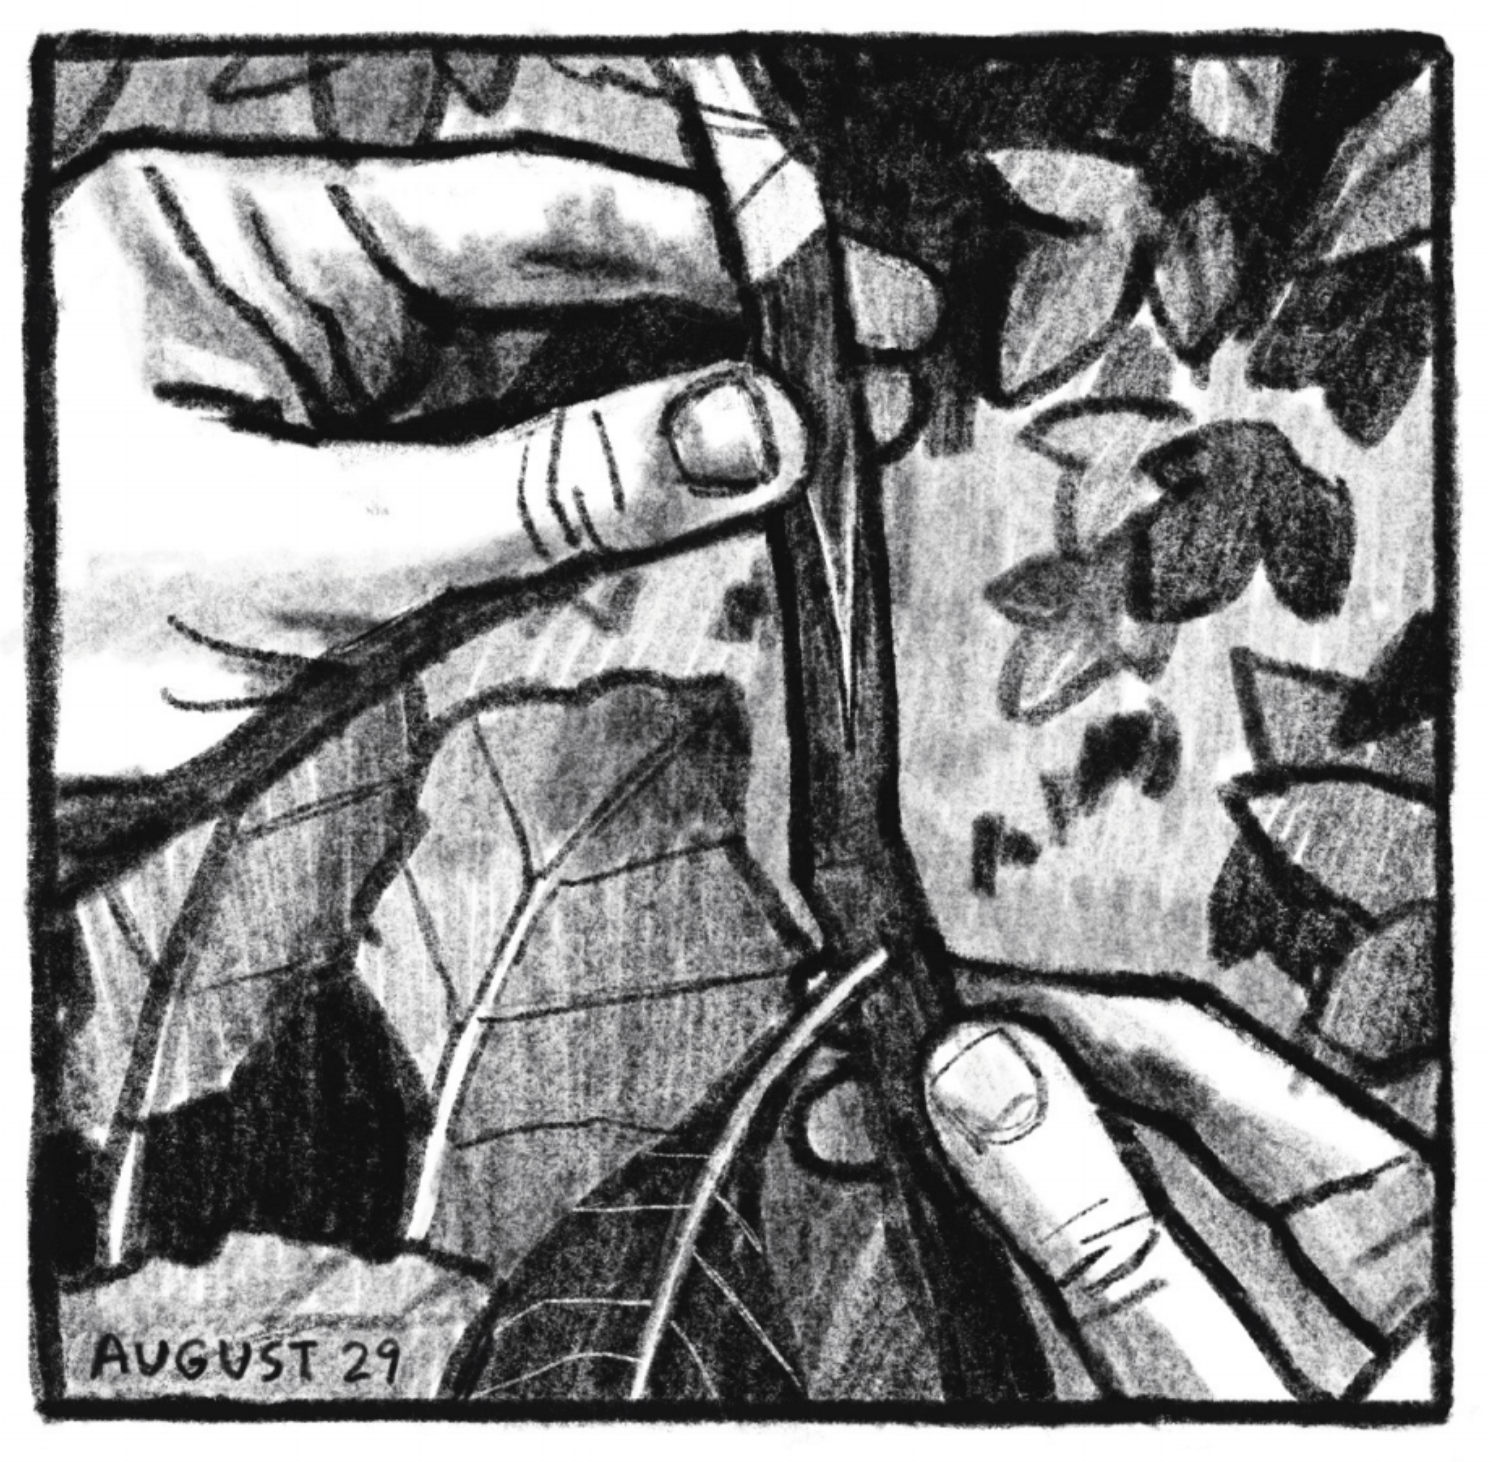 A zoomed in view of hands holding a plantâ€™s steam with a leaf attached. In the background are more leaves and plants. â€œAugust 27.â€